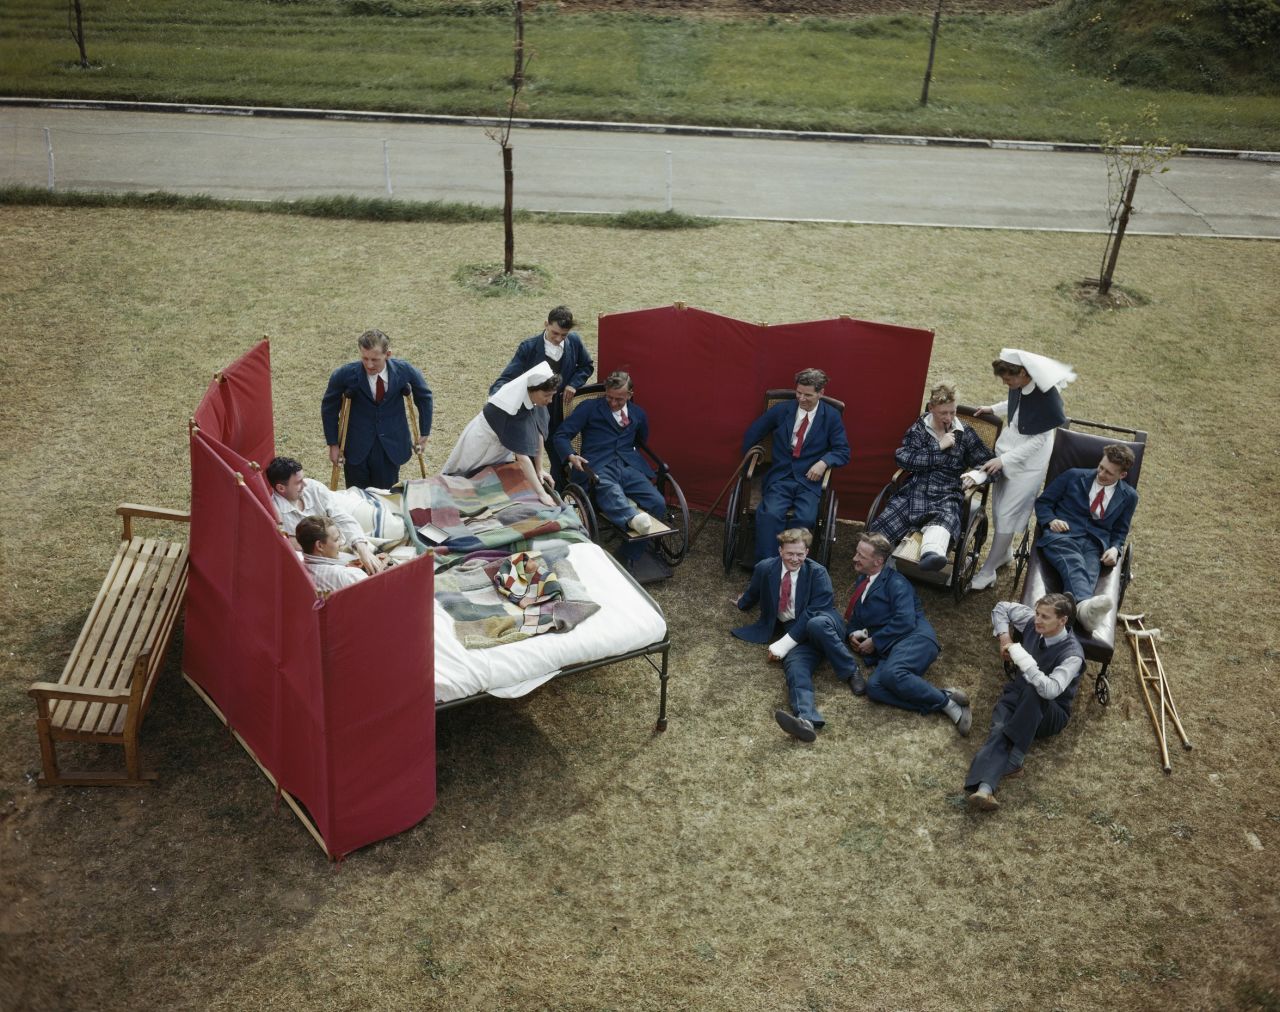 Nurses and convalescent aircrew at Princess Mary's Royal Air Force Hospital at Halton in Buckinghamshire, August 1943. The hospital was opened in 1927, and treated some 20,000 RAF casualties during the War. 